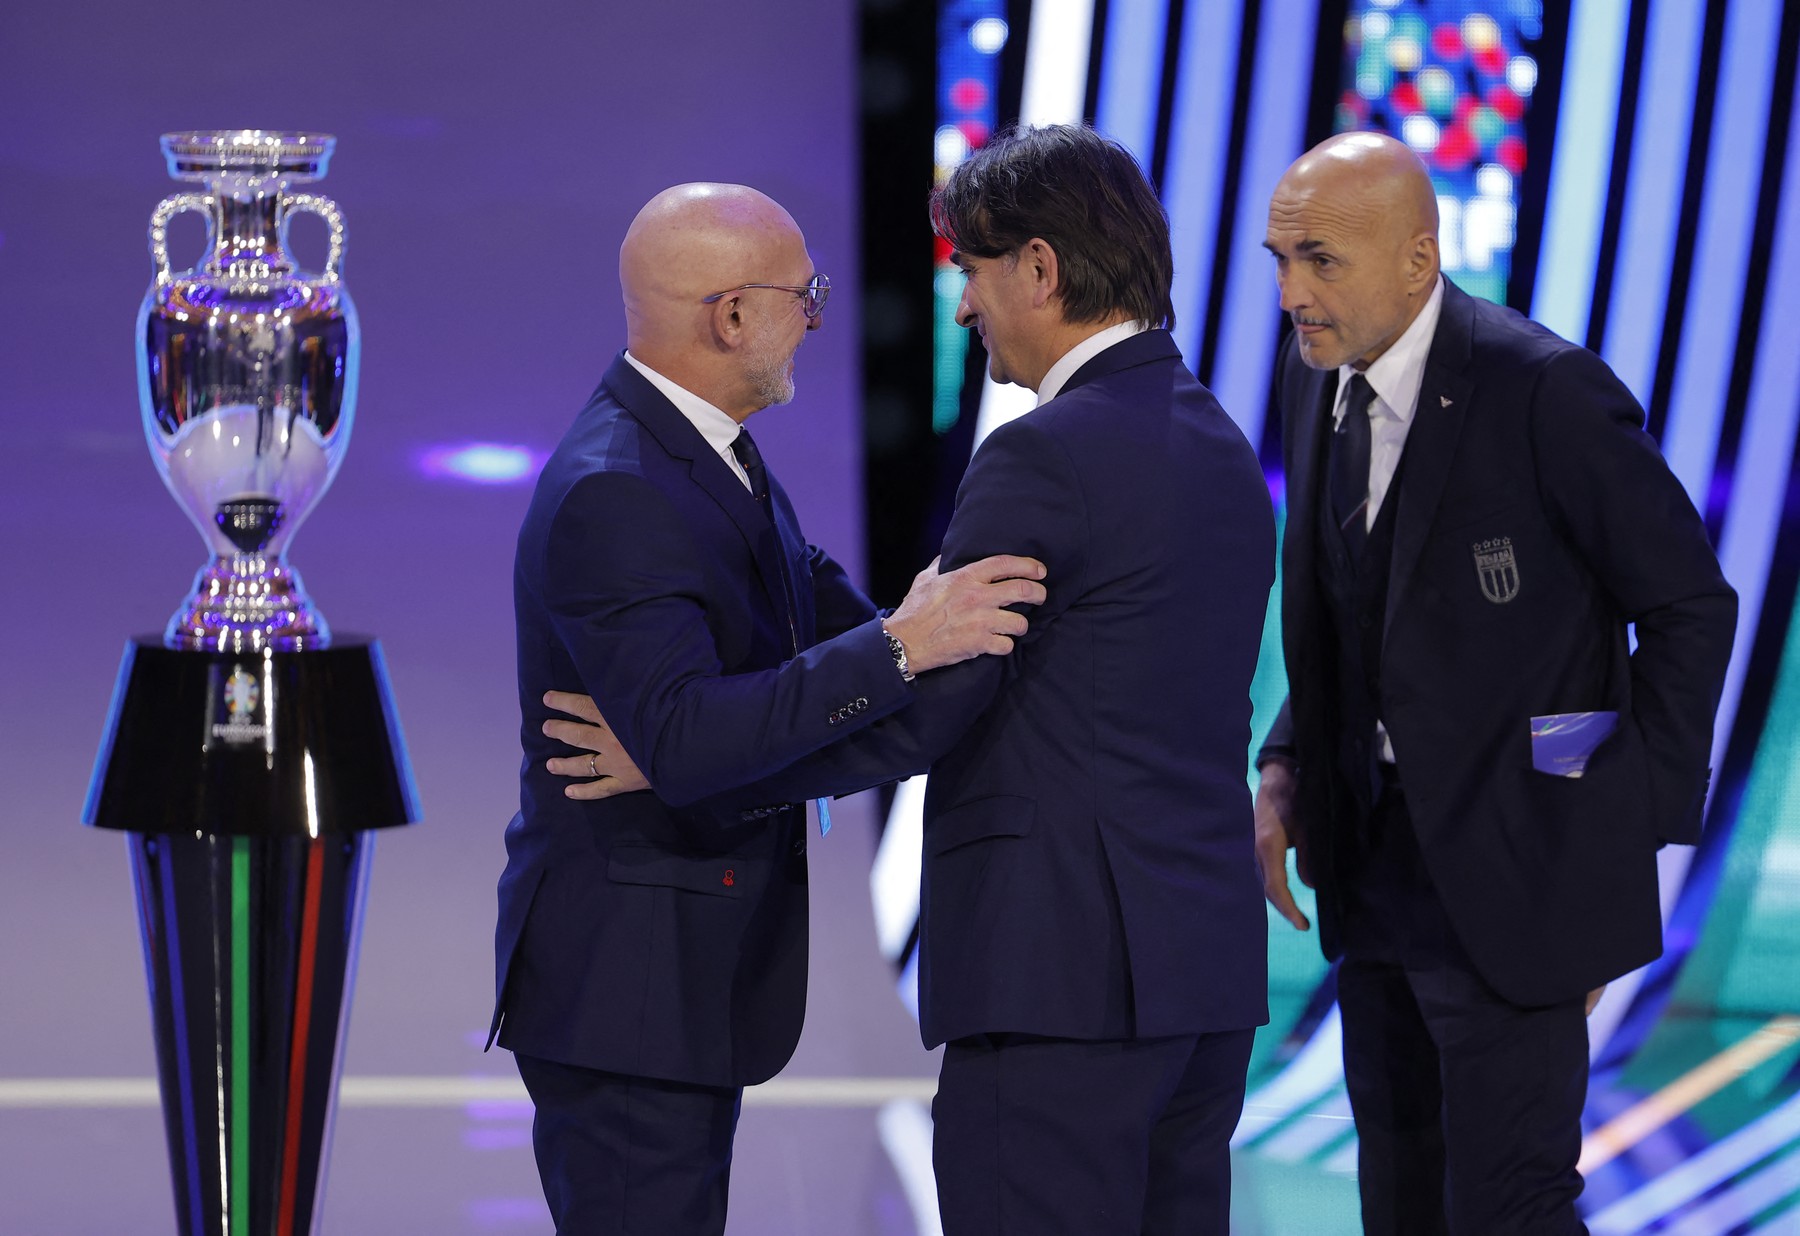 (L to R) Spain's head coach Luis de la Fuente greets Croatia's head coach Zlatko Dalic next to Italy's head coach Luciano Spalletti next to the trophy after the final draw for the UEFA Euro 2024 European Championship football competition in Hamburg, northern Germany on December 2, 2023.,Image: 826197303, License: Rights-managed, Restrictions: , Model Release: no, Credit line: Odd ANDERSEN / AFP / Profimedia